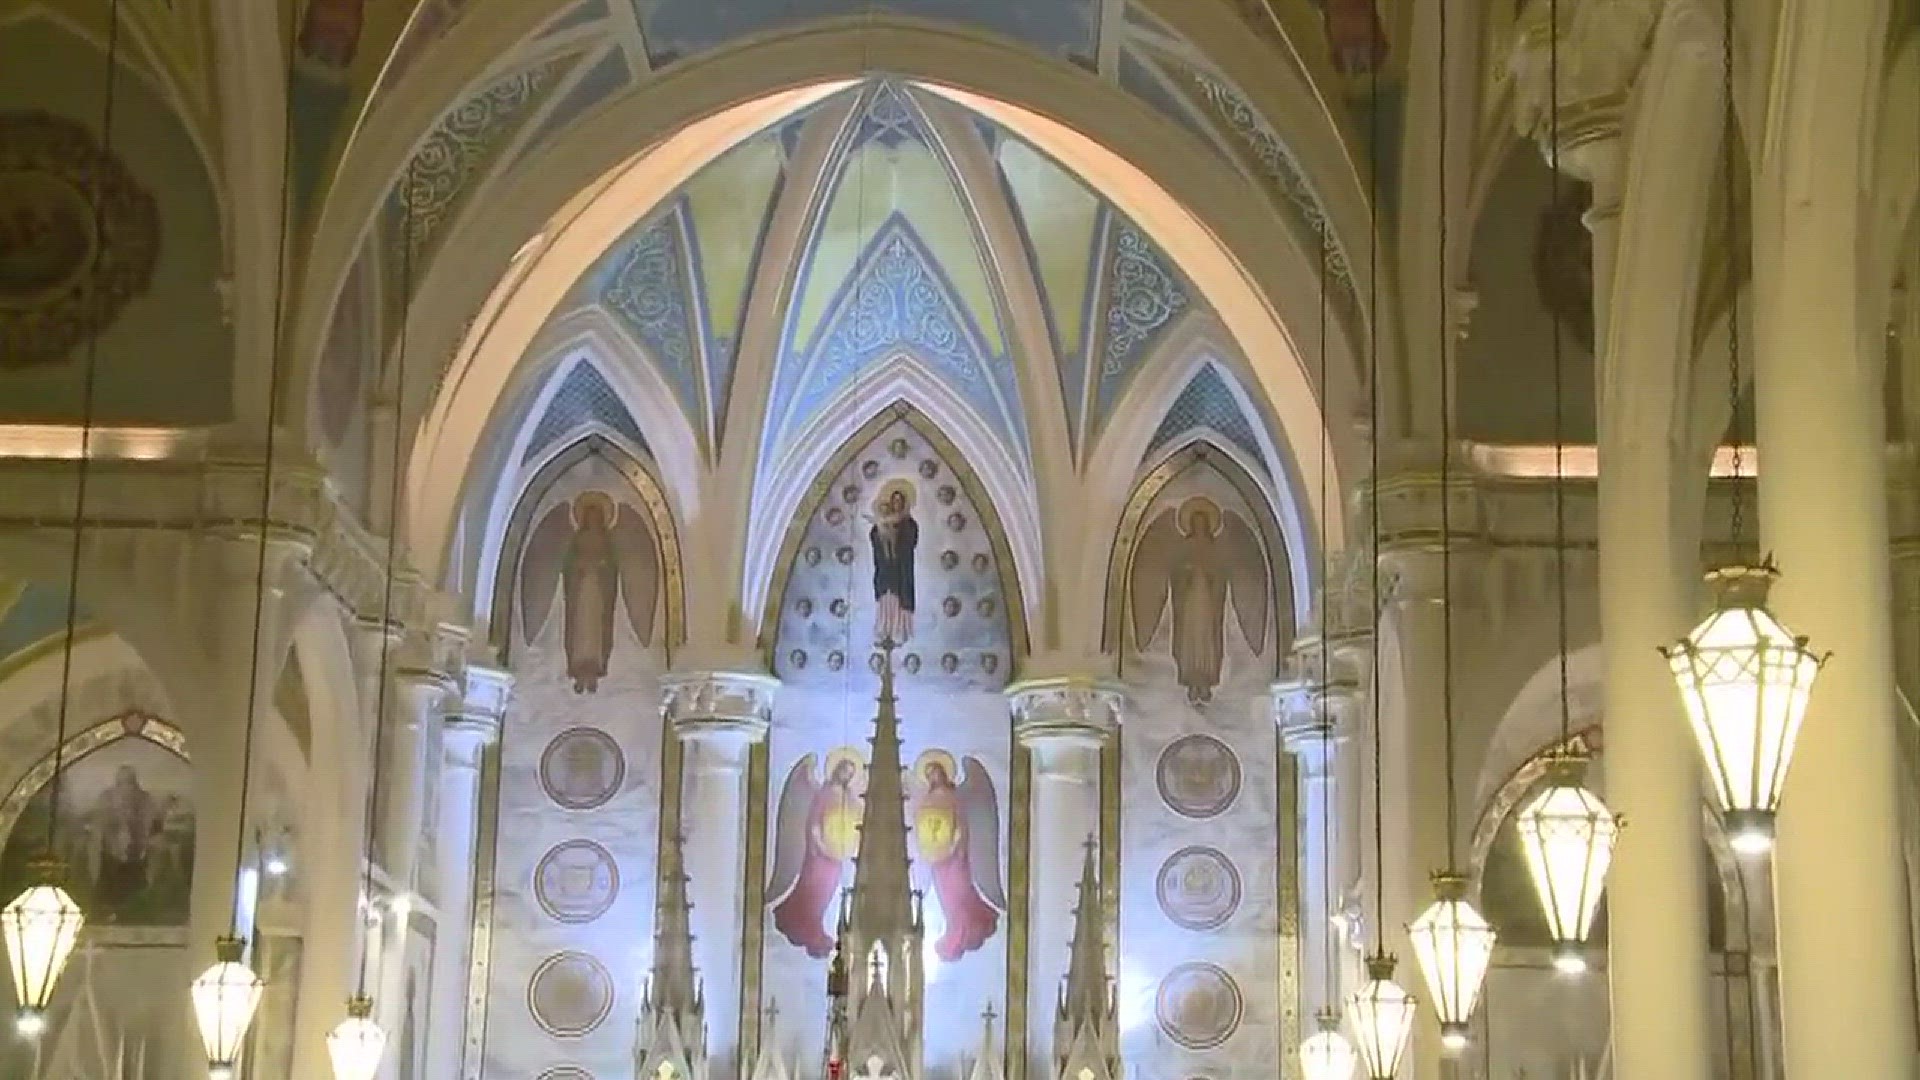 Celebrate WNY: St. Mary of the Angels Basilica in Olean, NY